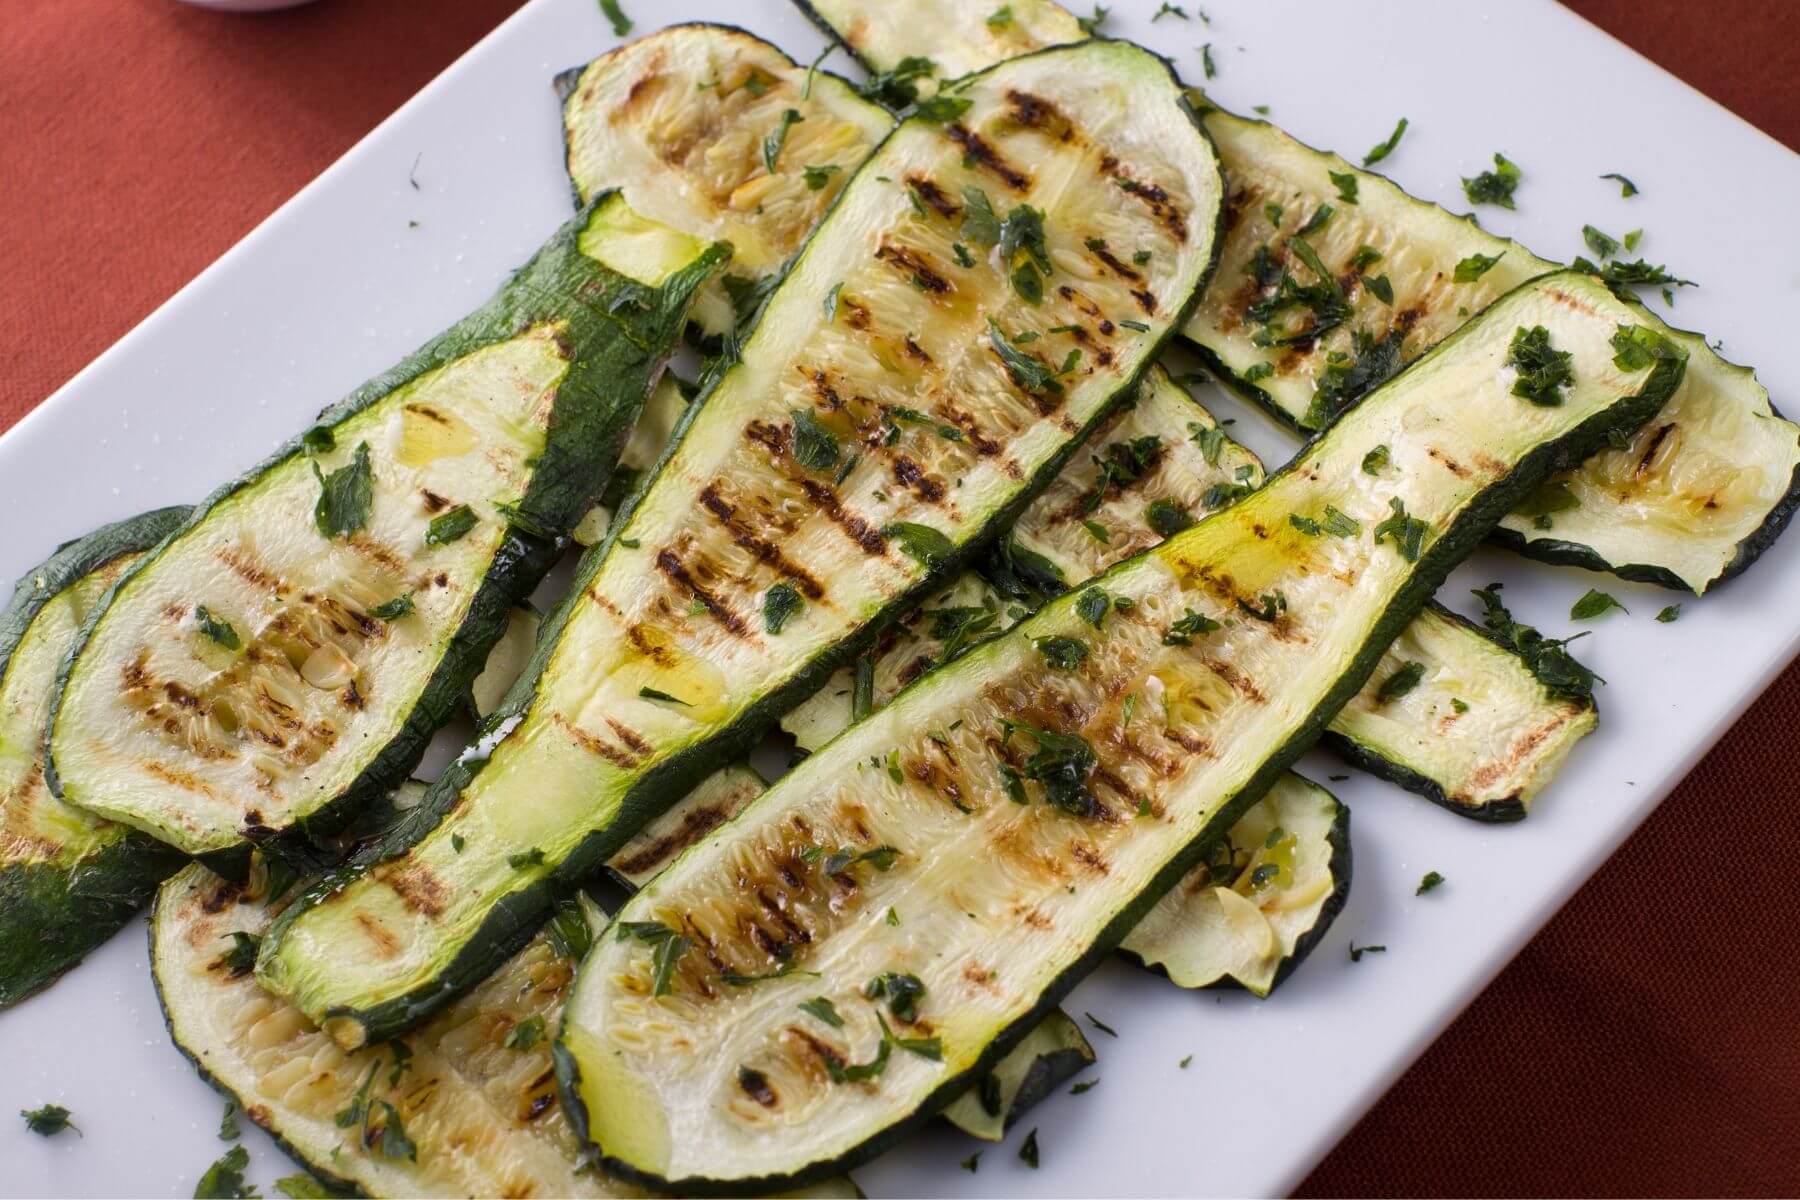 A New Spin on the Grill - to Grill Zucchini - Simple Gluten Free Side!